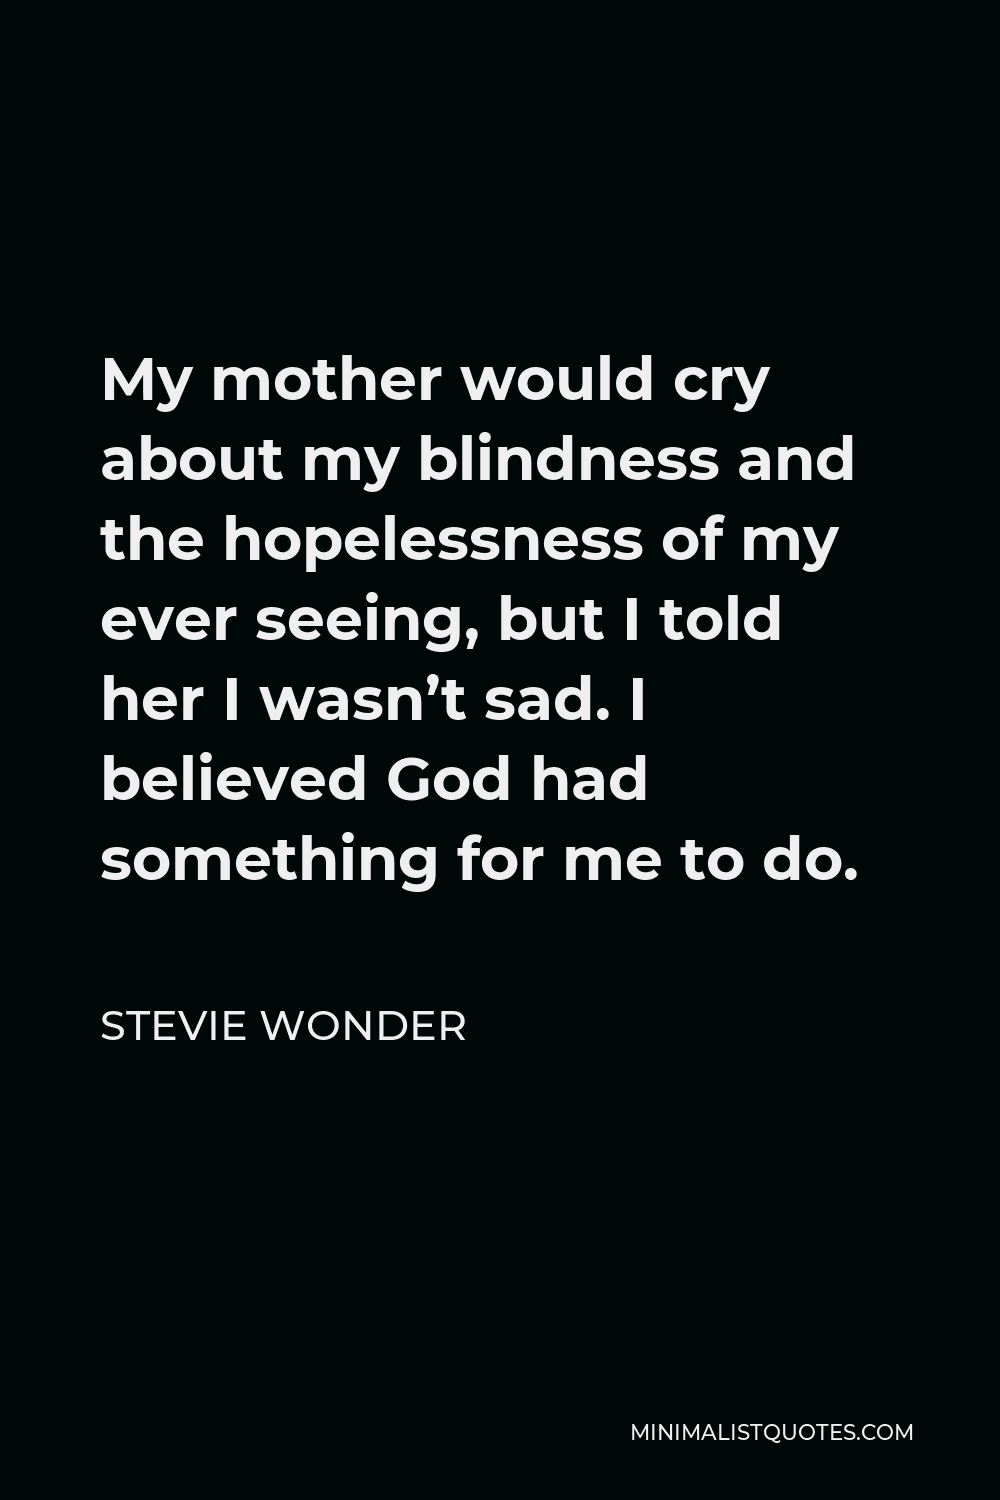 Stevie Wonder Quote - My mother would cry about my blindness and the hopelessness of my ever seeing, but I told her I wasn’t sad. I believed God had something for me to do.